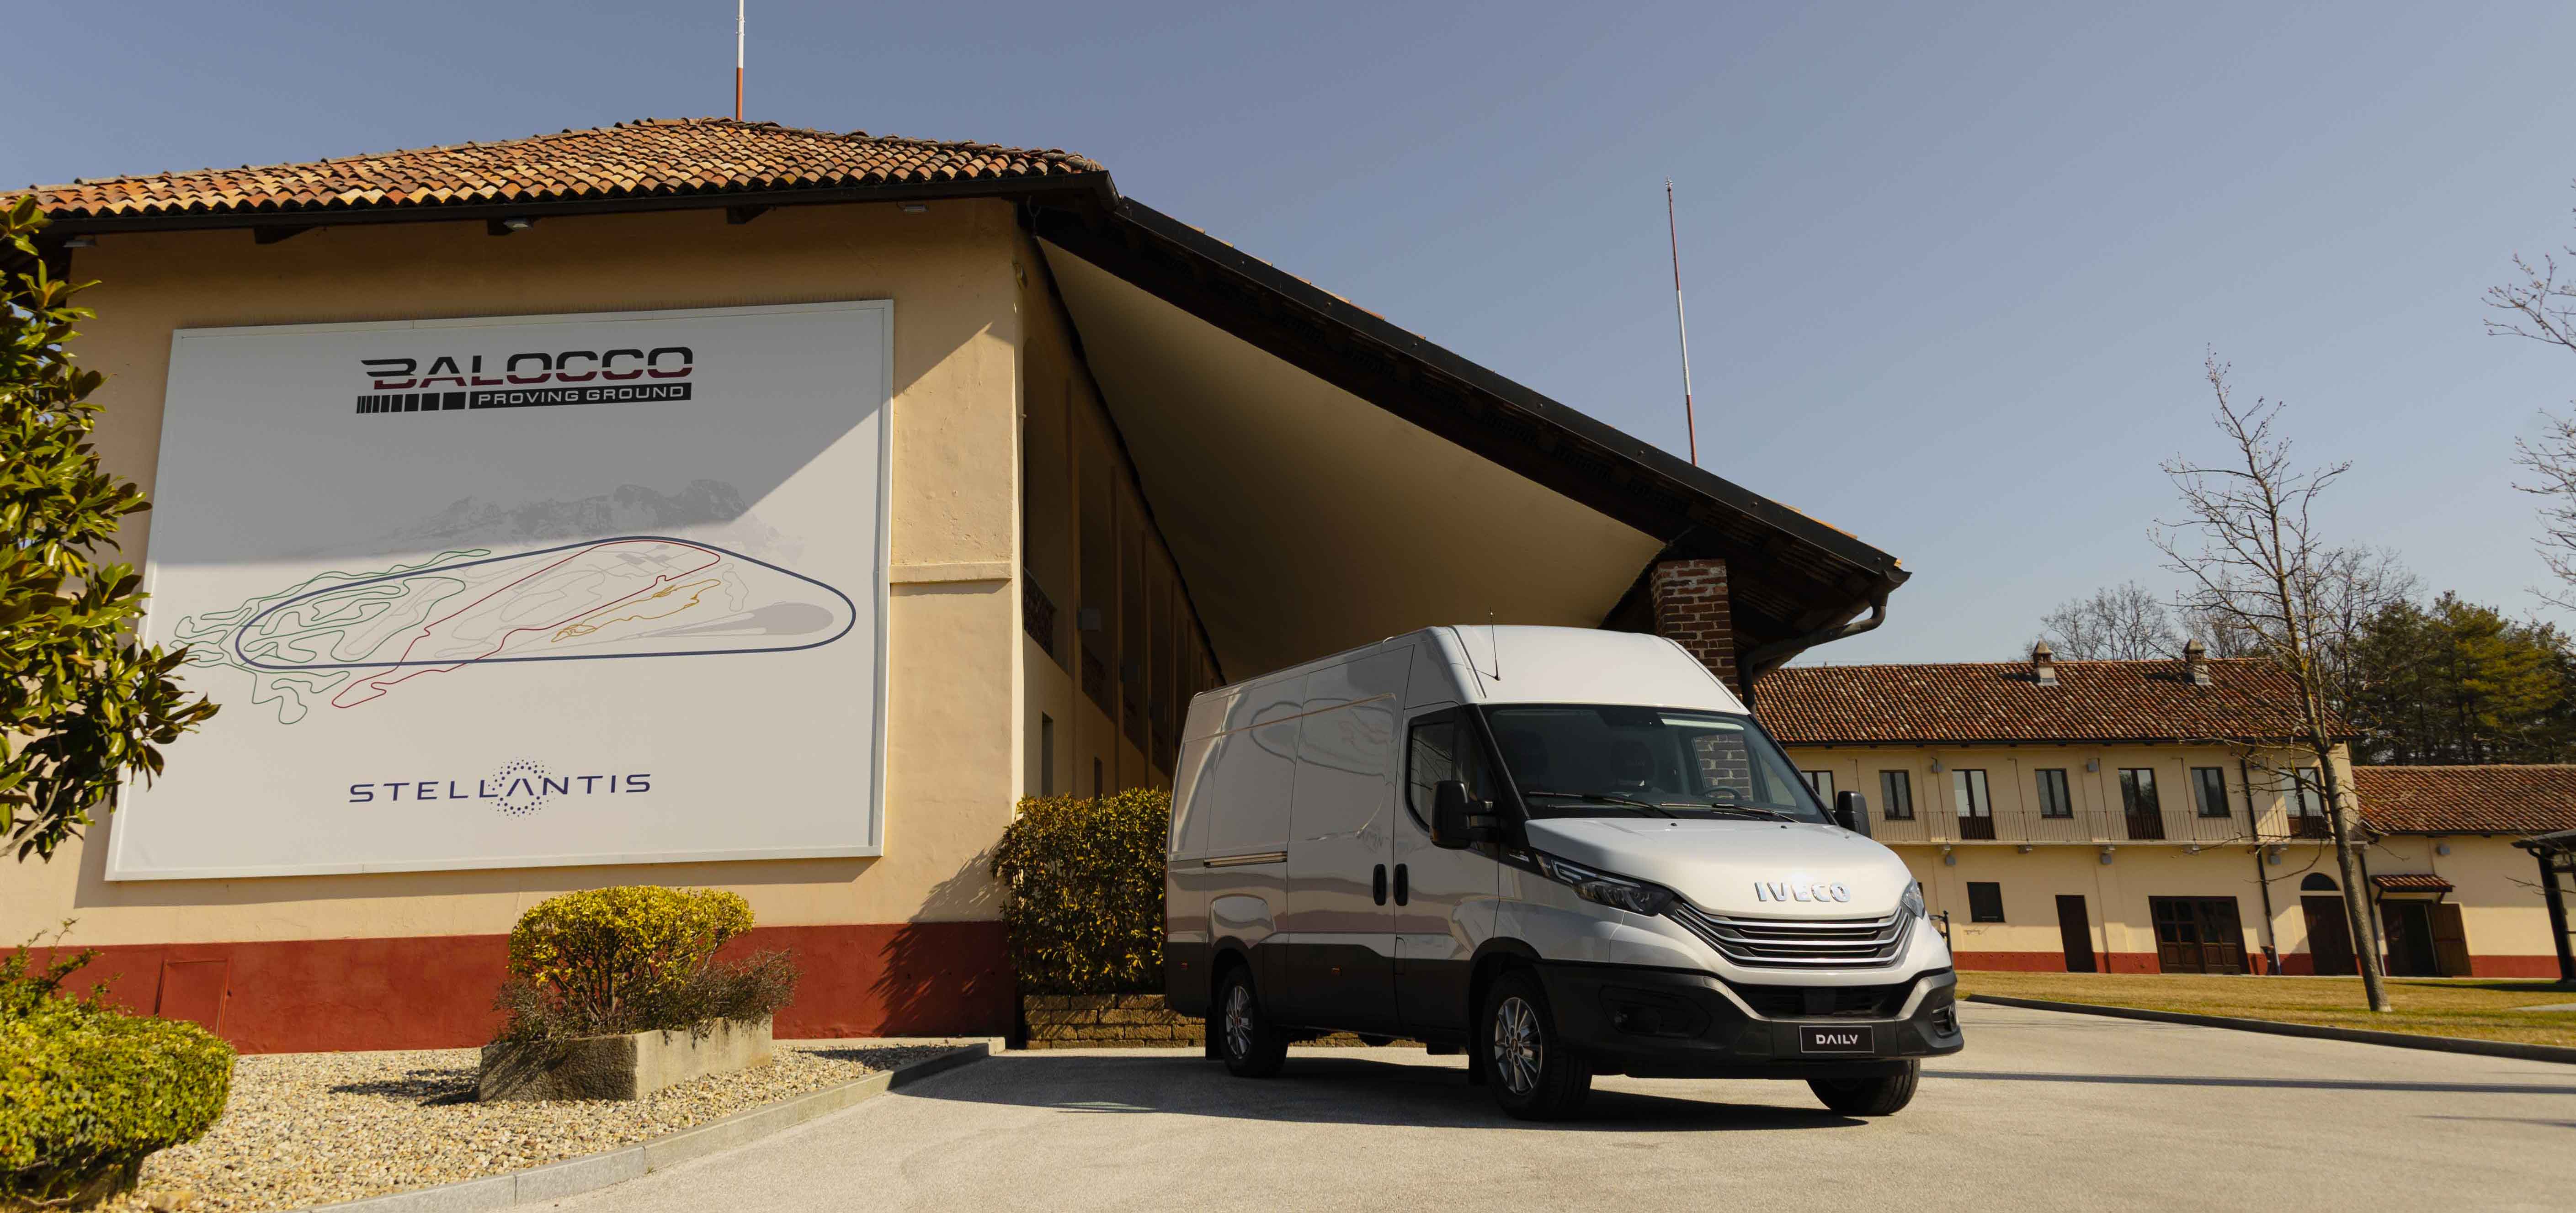 Photo of a white van parked outside the Camino room where a map of the Balocco slopes can also be glimpsed